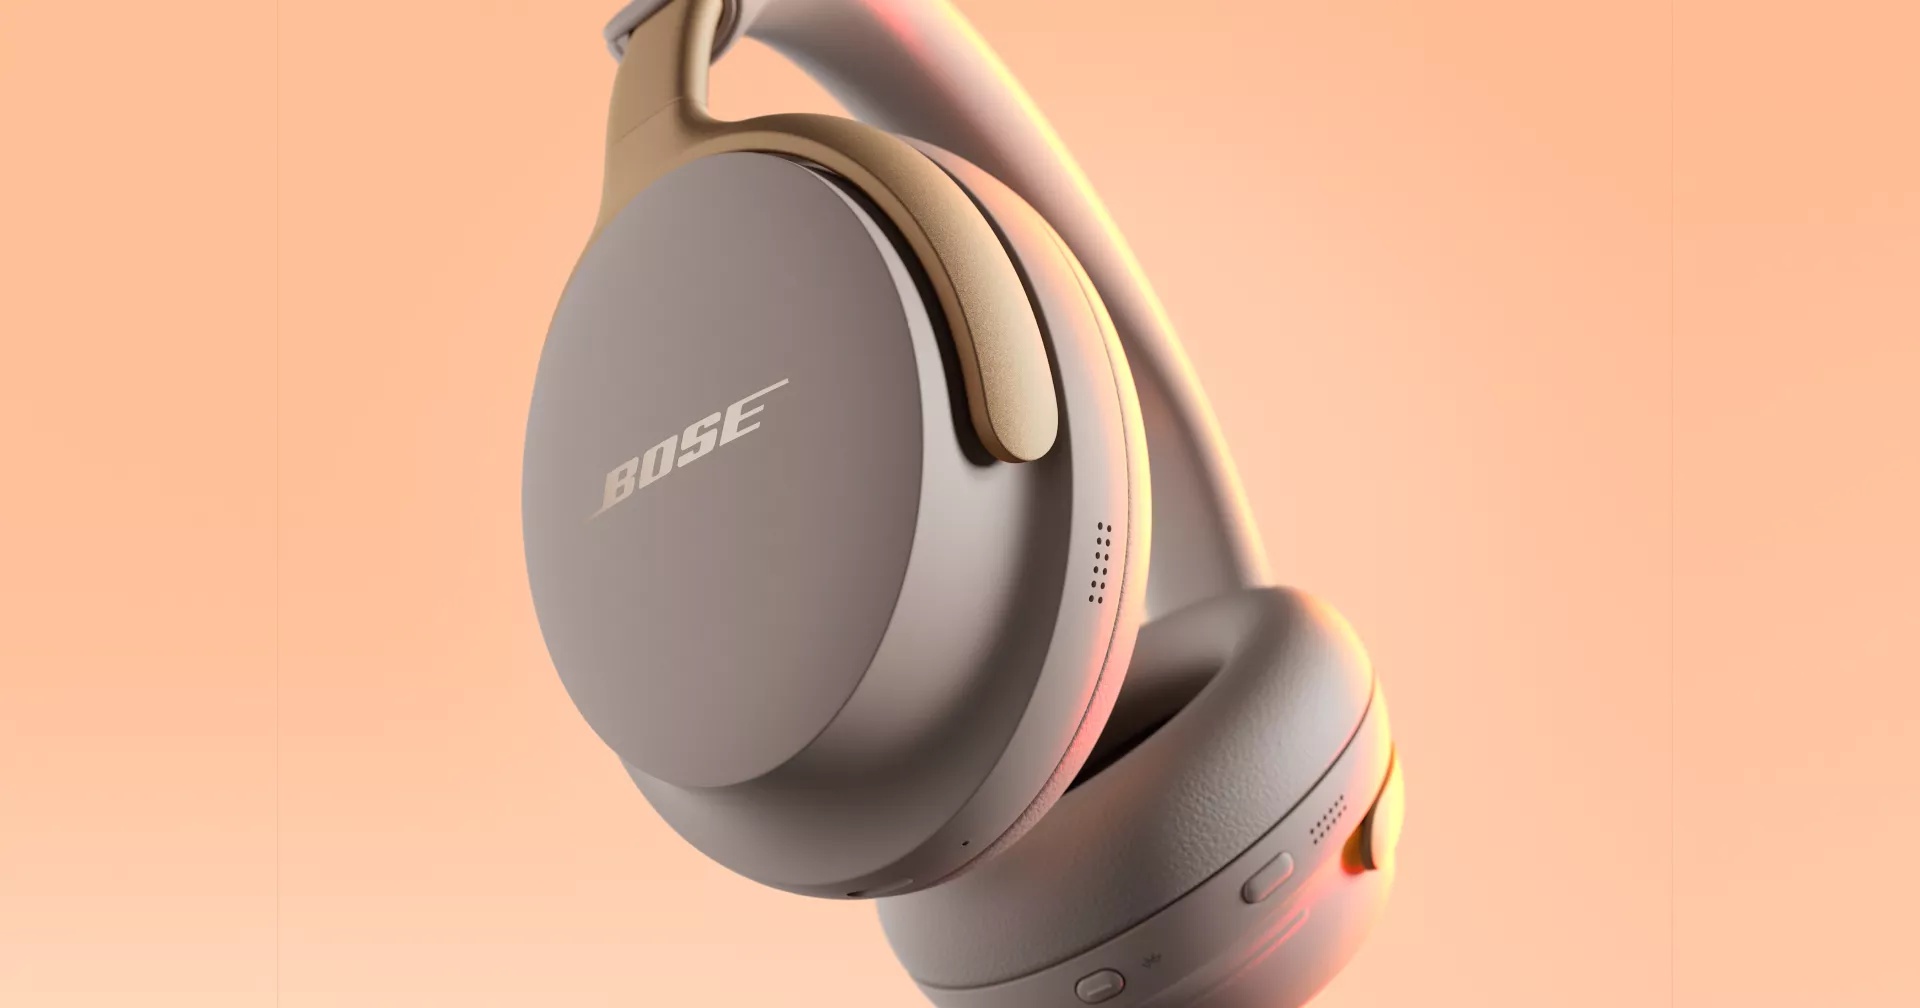 Bose QuietComfort Ultra Headphones review: The sound is all around